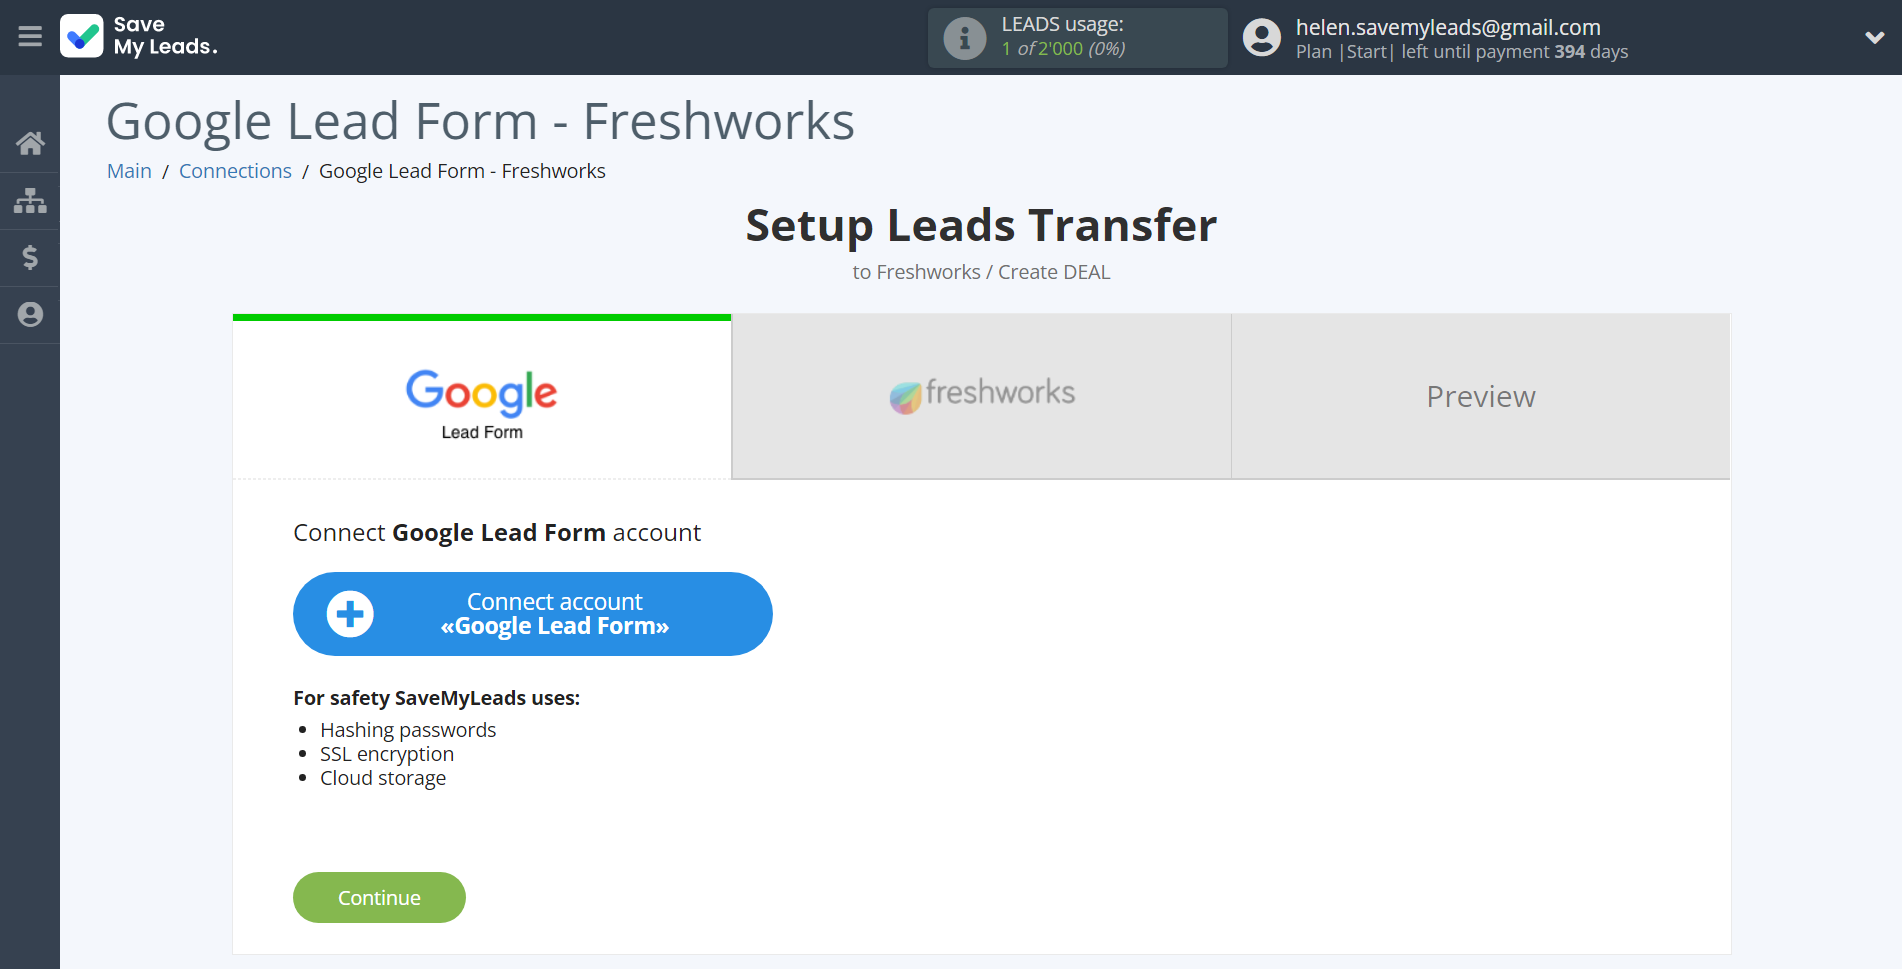 How to Connect Google Lead Form with Freshworks Create Deal | Data Source account